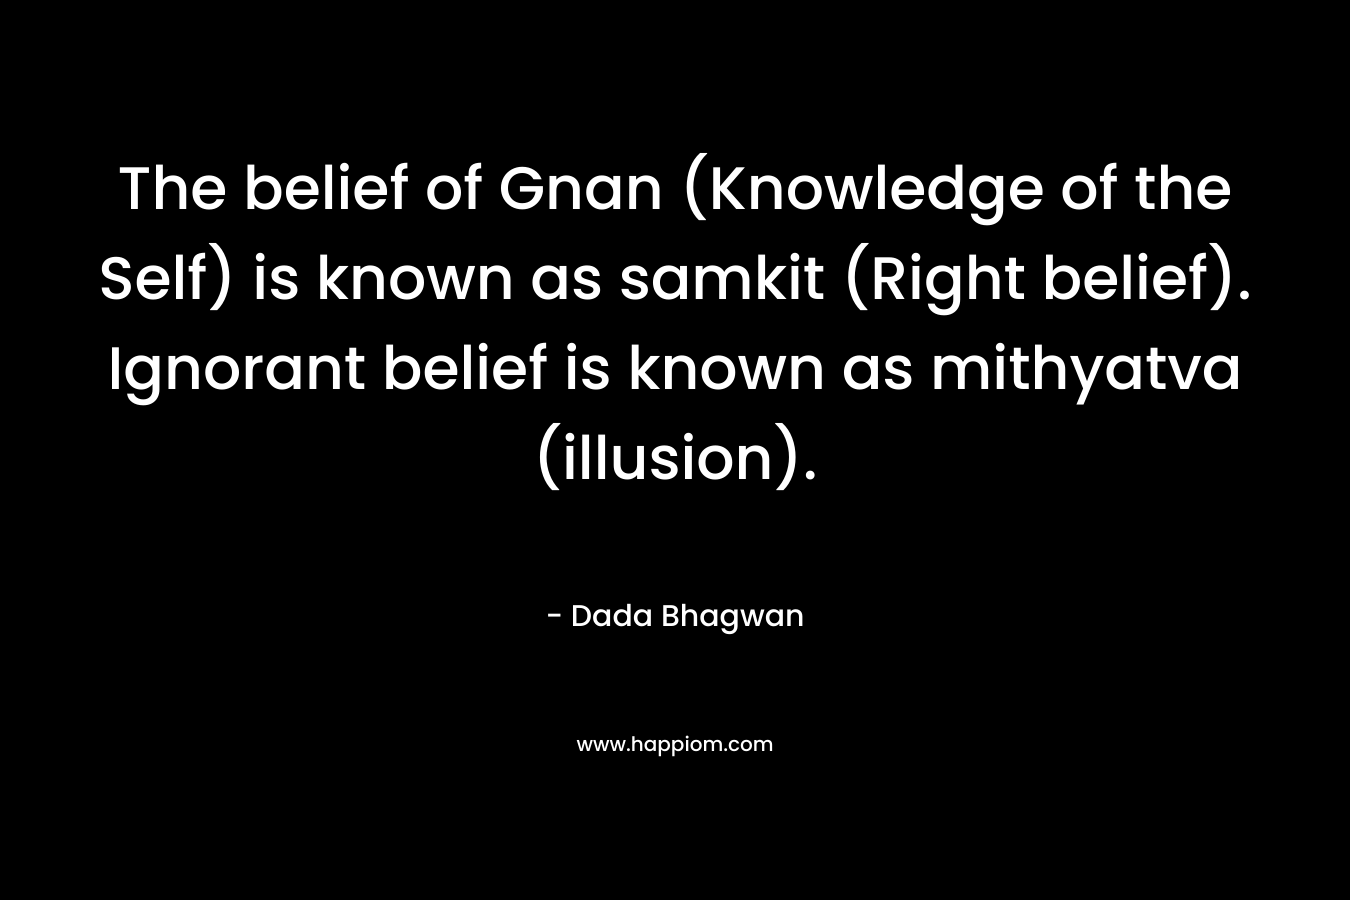 The belief of Gnan (Knowledge of the Self) is known as samkit (Right belief). Ignorant belief is known as mithyatva (illusion). – Dada Bhagwan